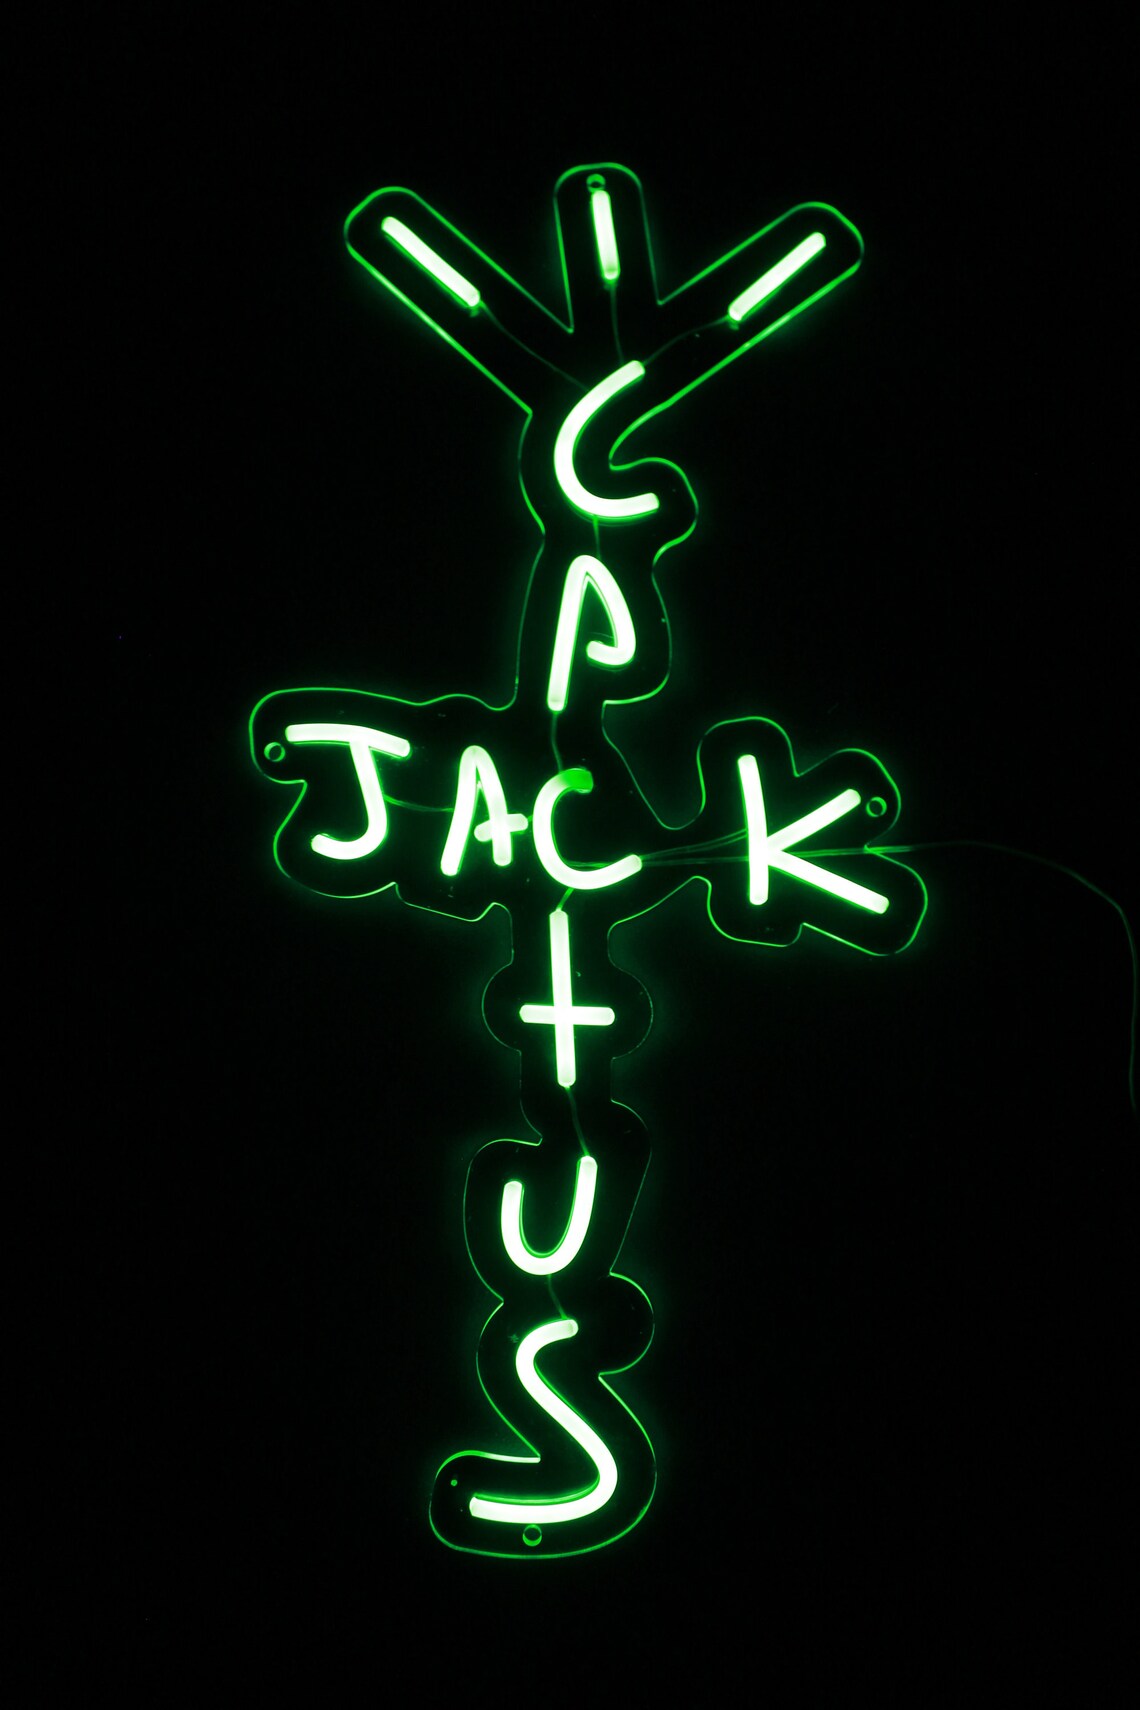 CACTUS JACK inspired by Travis Scott led NEON sign